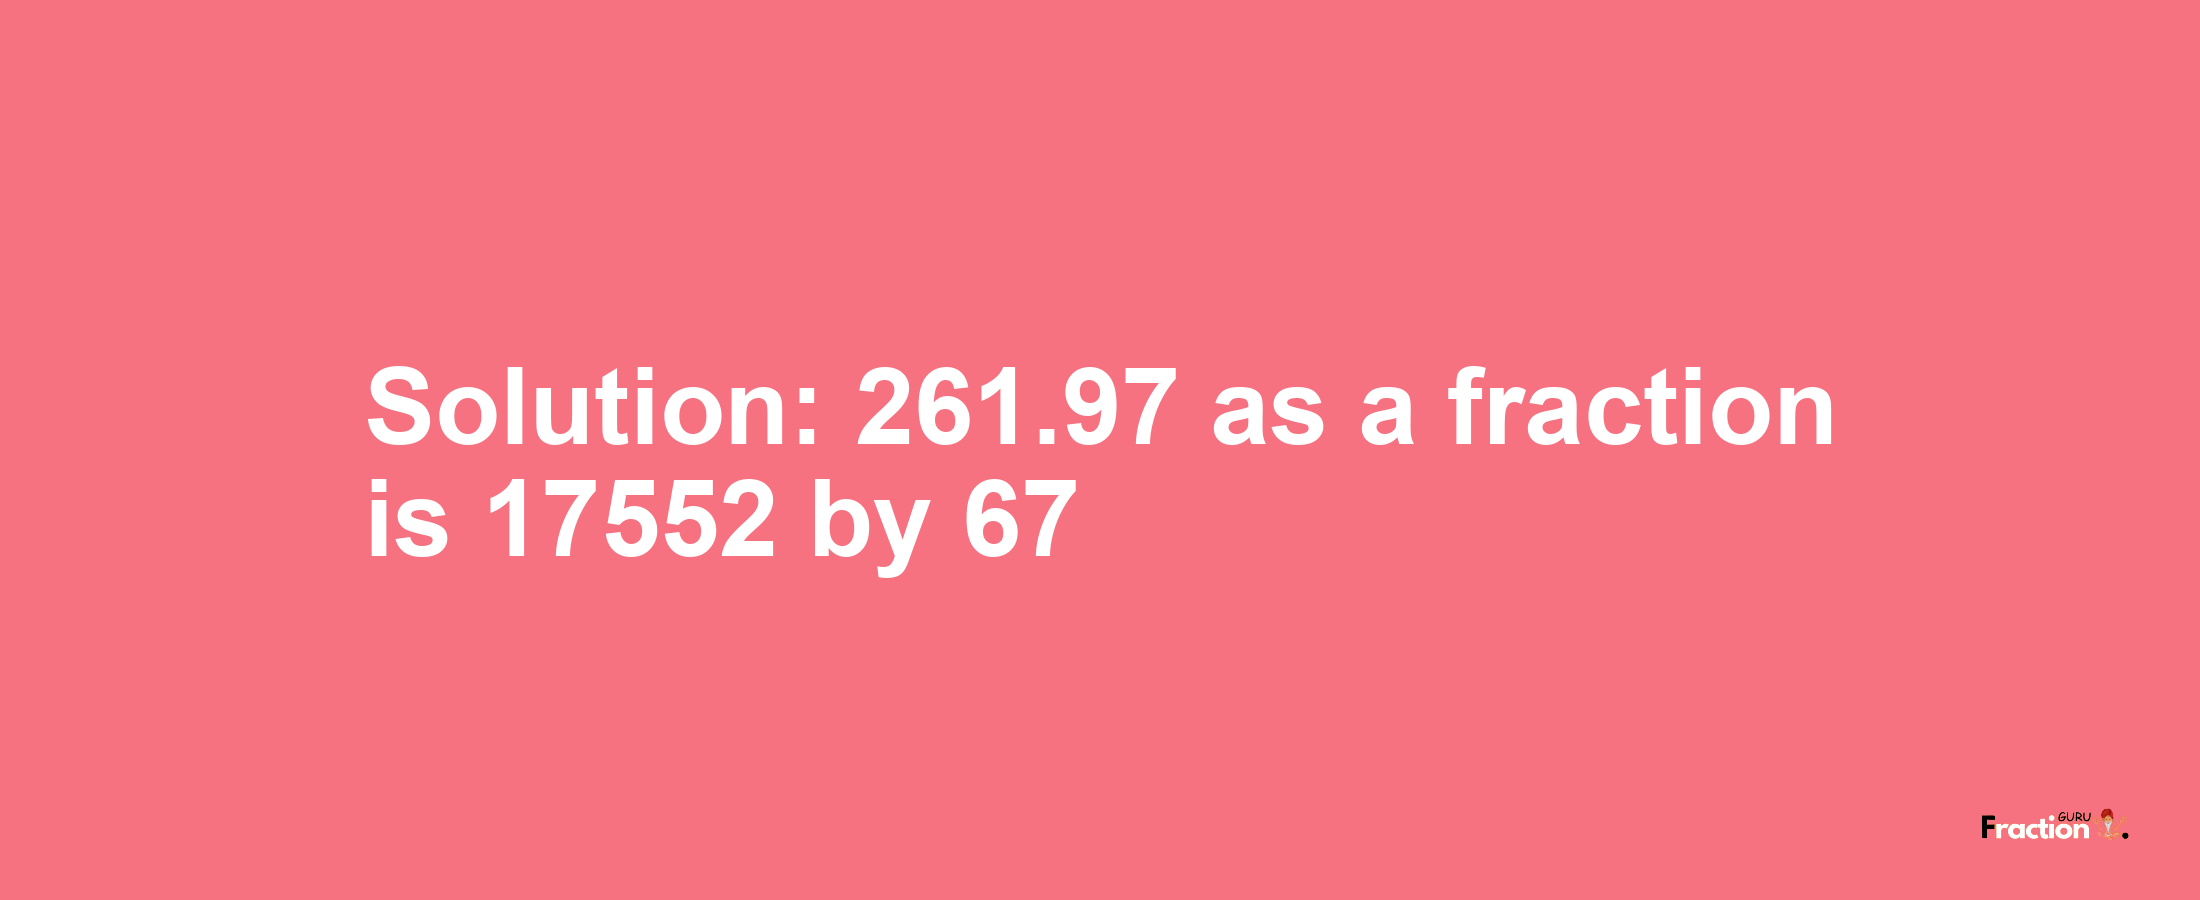 Solution:261.97 as a fraction is 17552/67